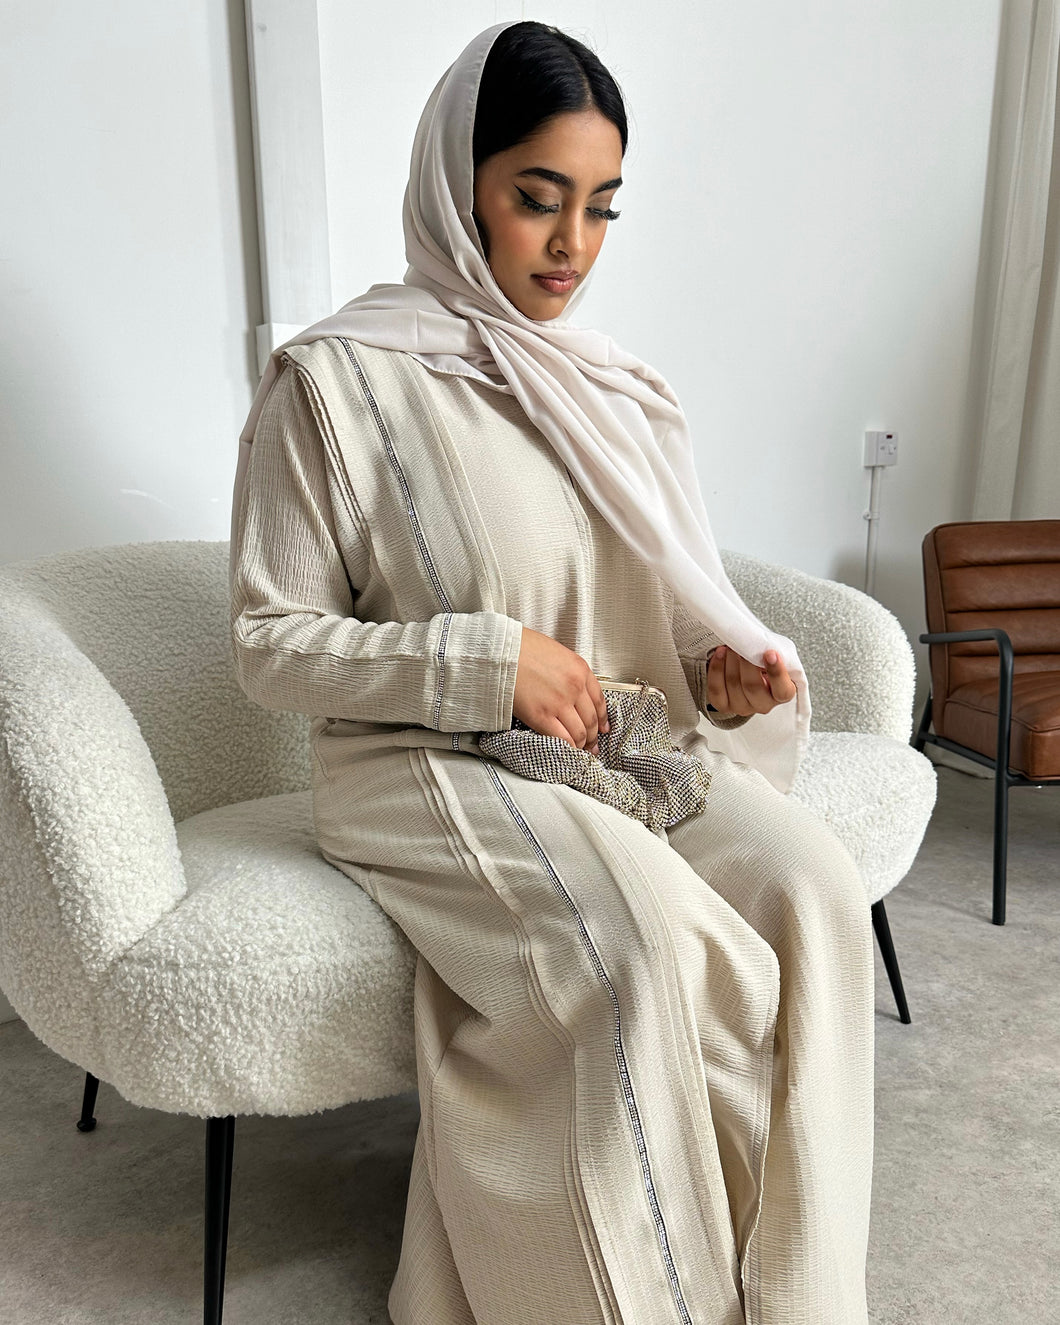 Elegant Abaya with Beads and 3D Layered Appliqué (Cream)